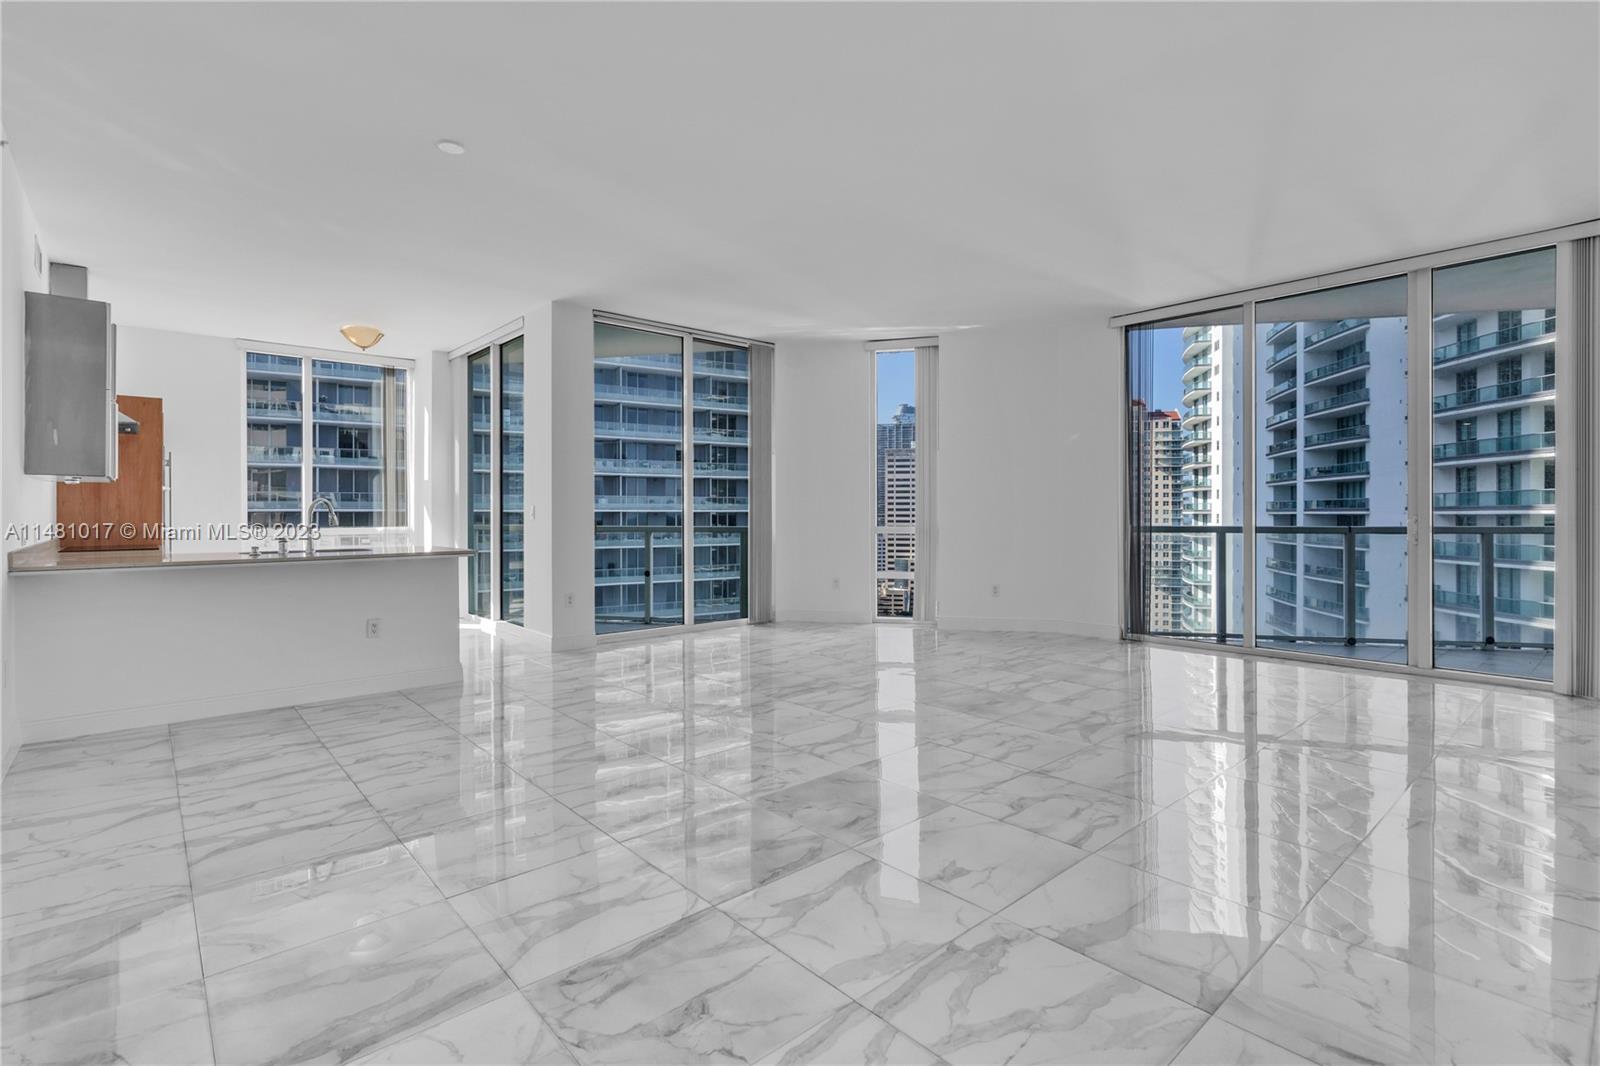 Luxury living awaits at this exquisite high-rise corner tower suite in the heart of Miami's prestigious Brickell neighborhood. With 10-foot ceilings that create an airy & spacious ambiance, this luxurious residence boasts 3 beds/3.5 bath. The Italian top-of-the-line kitchen is a chef's dream, complete with SS appliances.The master bedroom boasts California-style Harwood closets, combining elegance & functionality. Marble flooring adorns the bathrooms. The master bath is a true oasis, featuring a Kohler spa tub & shower for ultimate relaxation.Beautiful rooftop pool/gym overlooking the bay, this serene oasis offers a tranquil retreat where you can unwind, soak up the sun, & revel in the breathtaking views. 2 parking spots,1 assigned 1 valet. Bank appraised value $925,000.00.